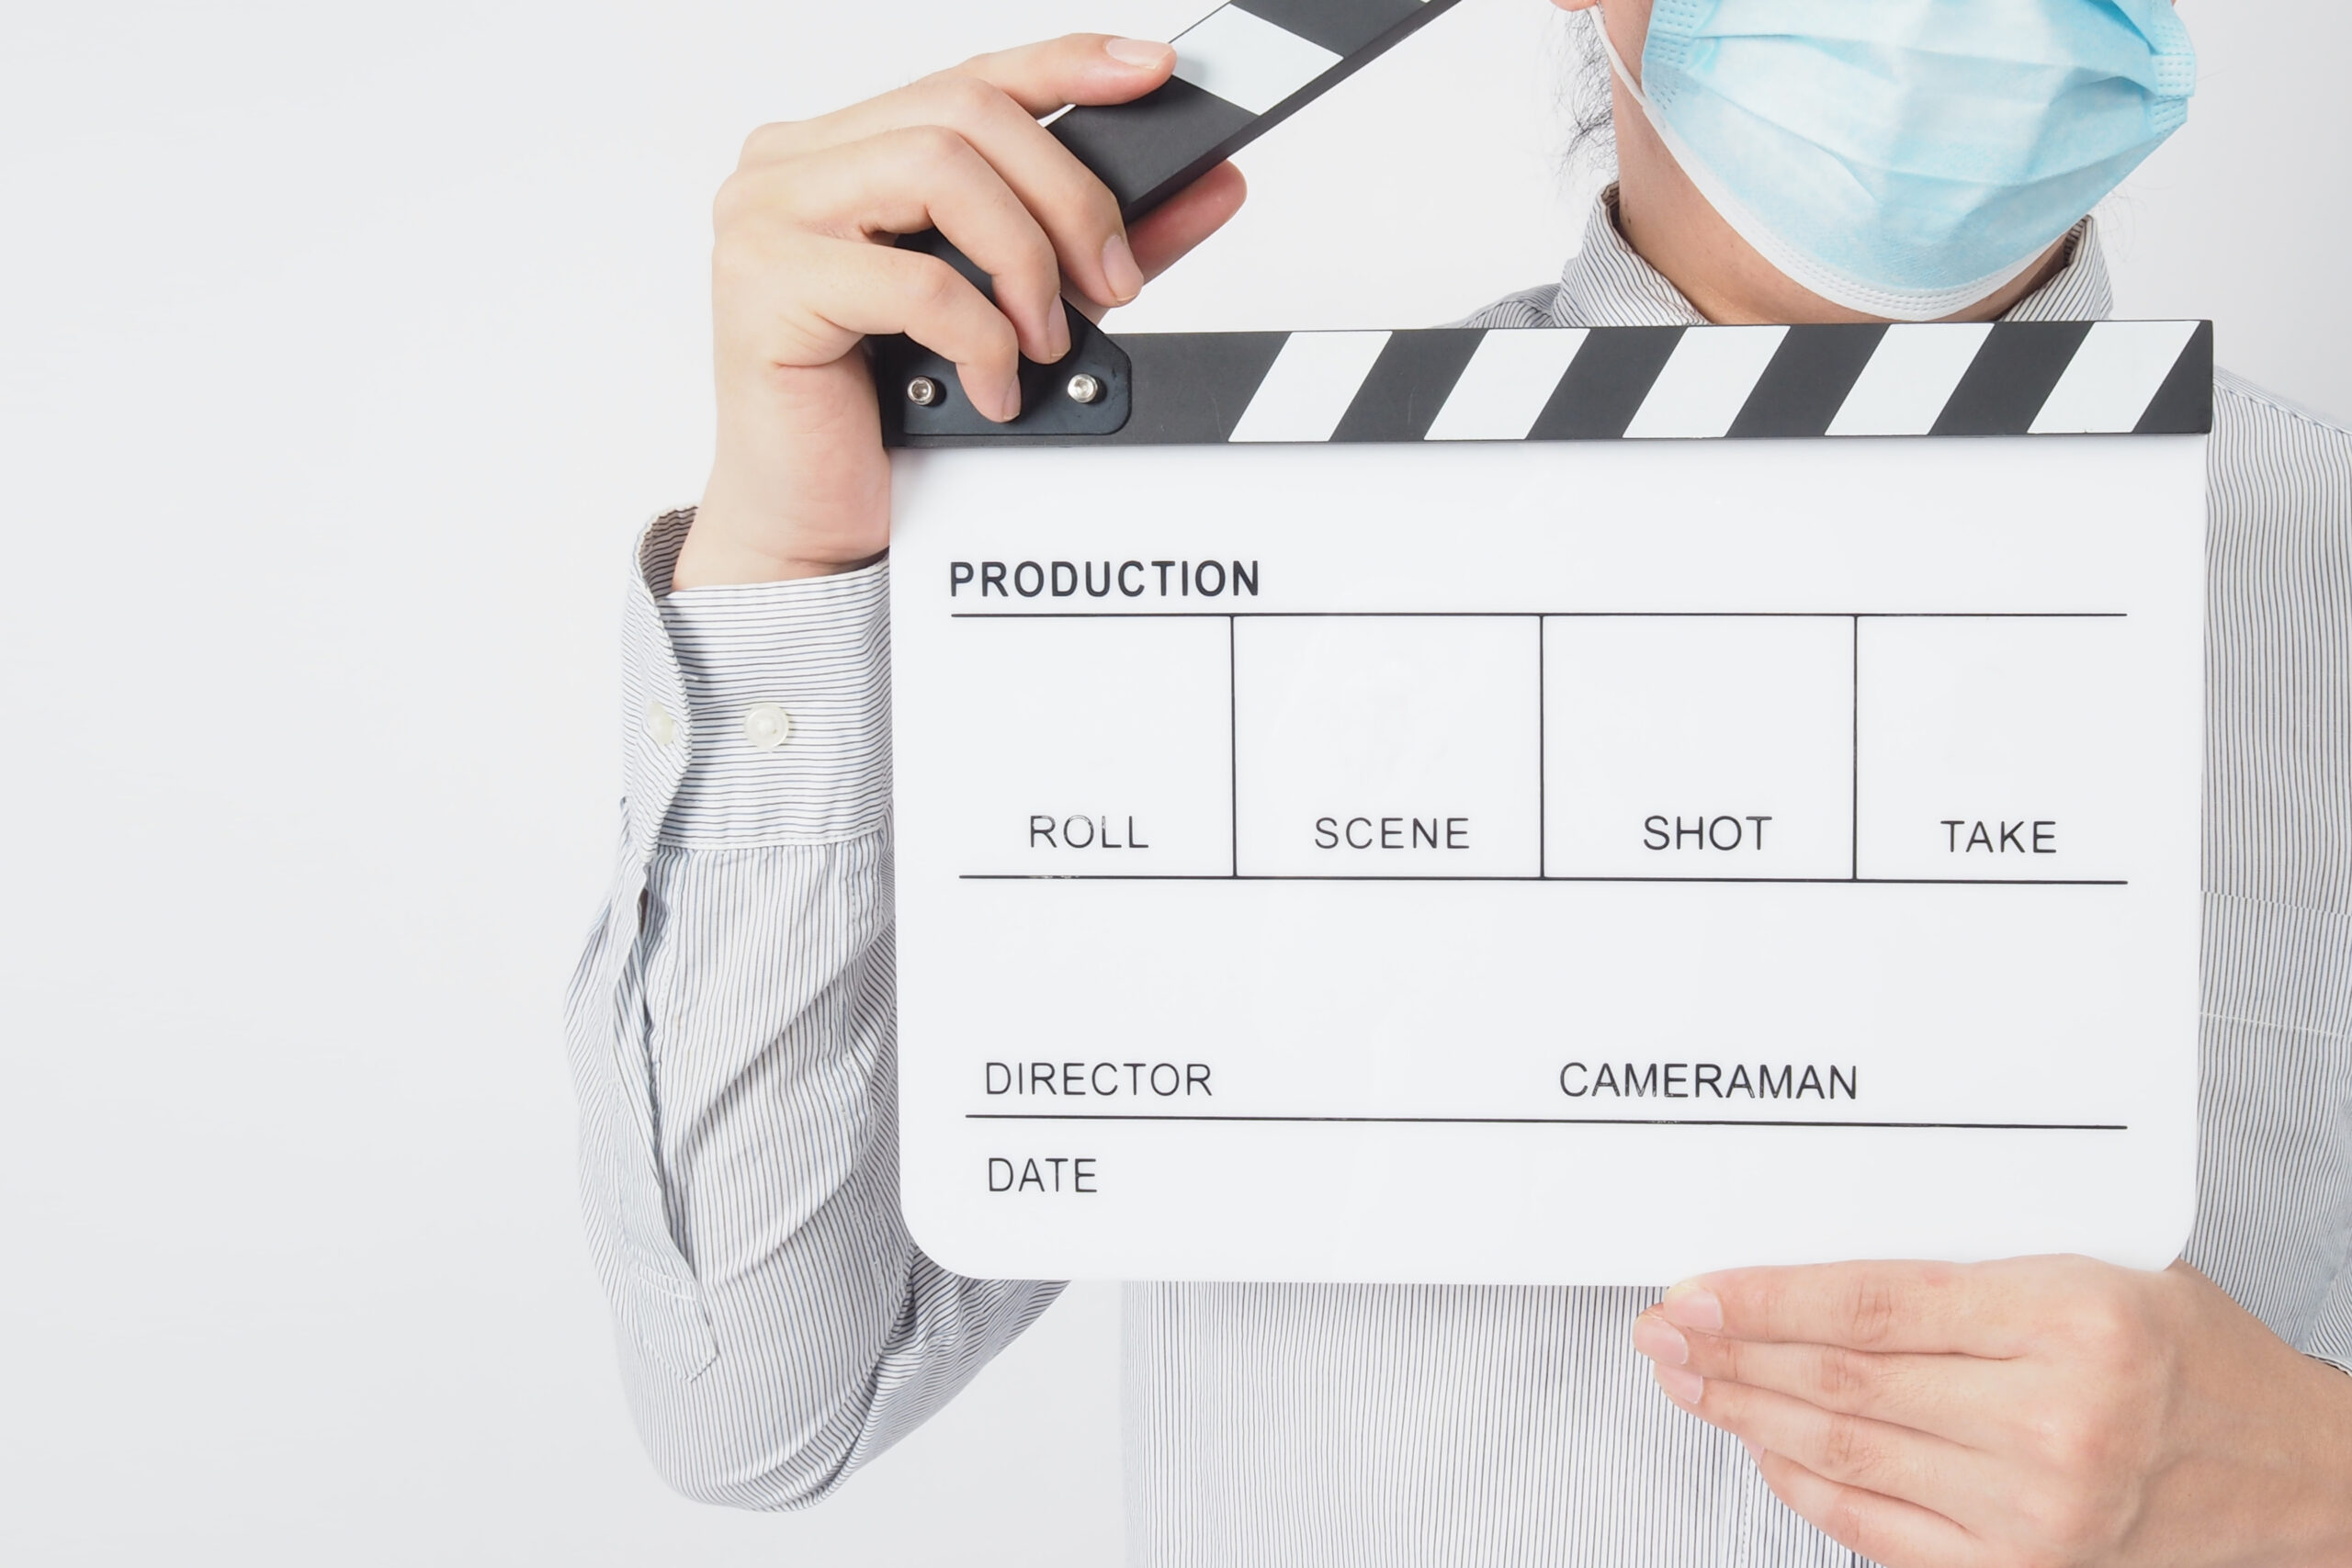 How to Grow Your Business Through Video Production During Covid-19